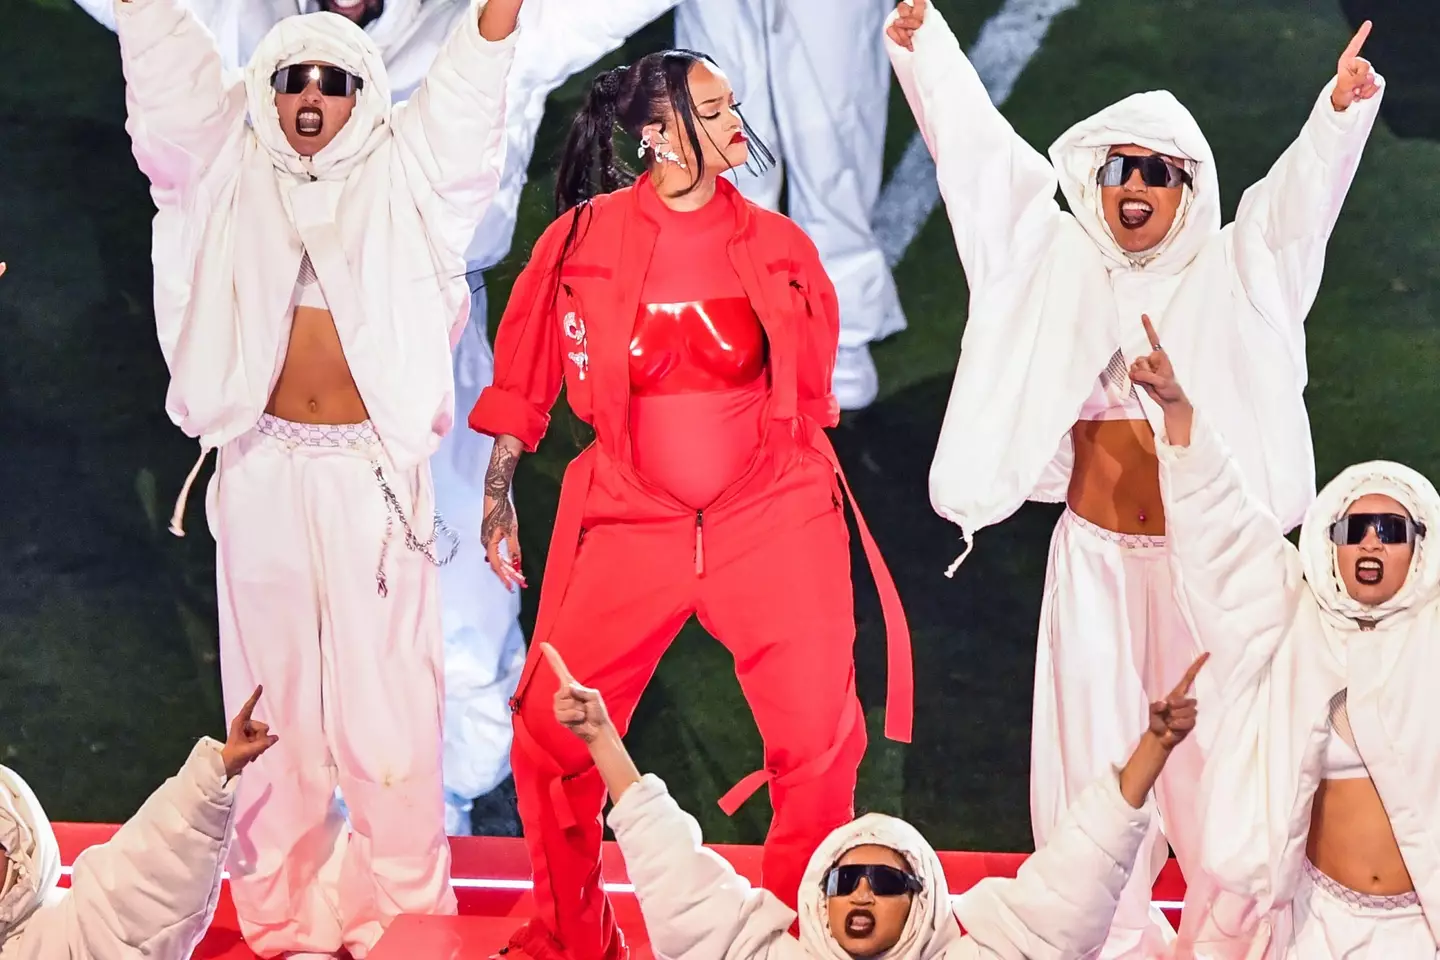 Rihanna blew people away with her Super Bowl performance.